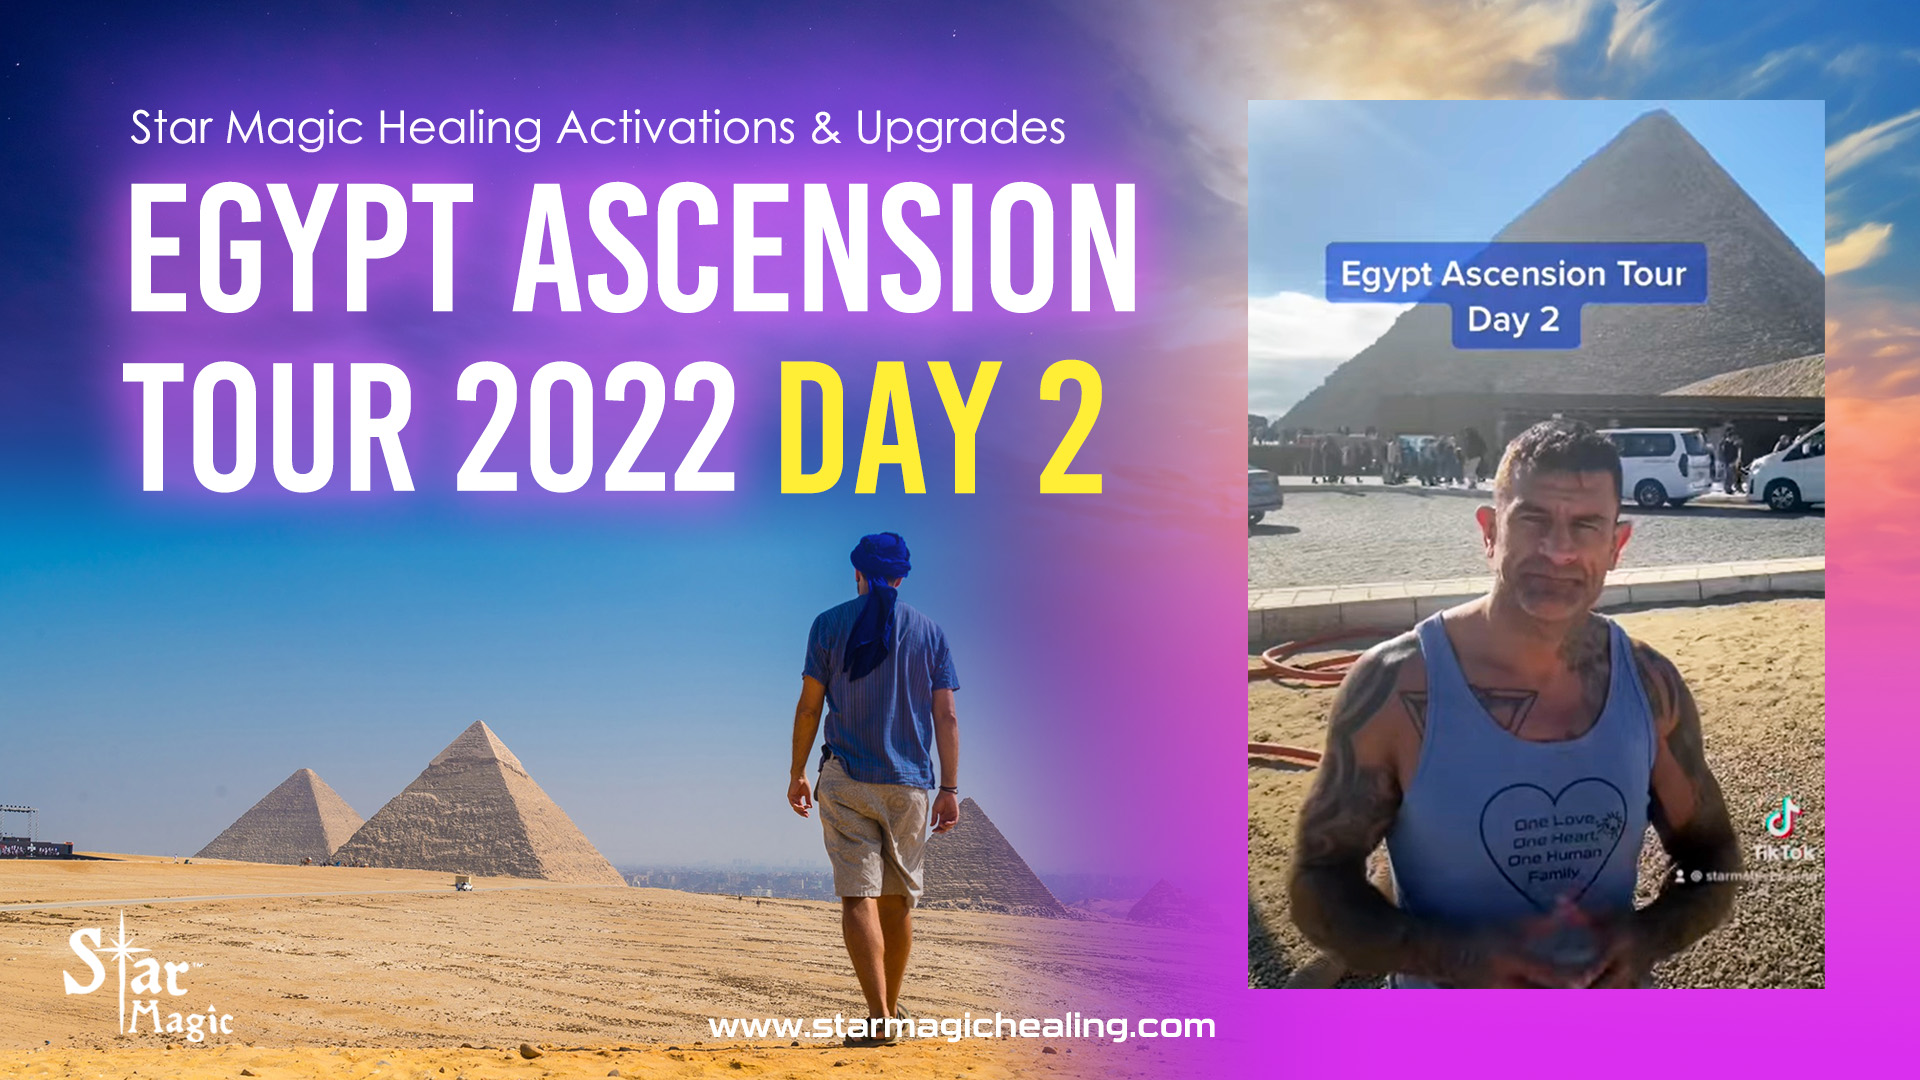 Star Magic Egypt Ascension Tour – Day 2 – Activations & Upgrades – Planetary & Human Ascension